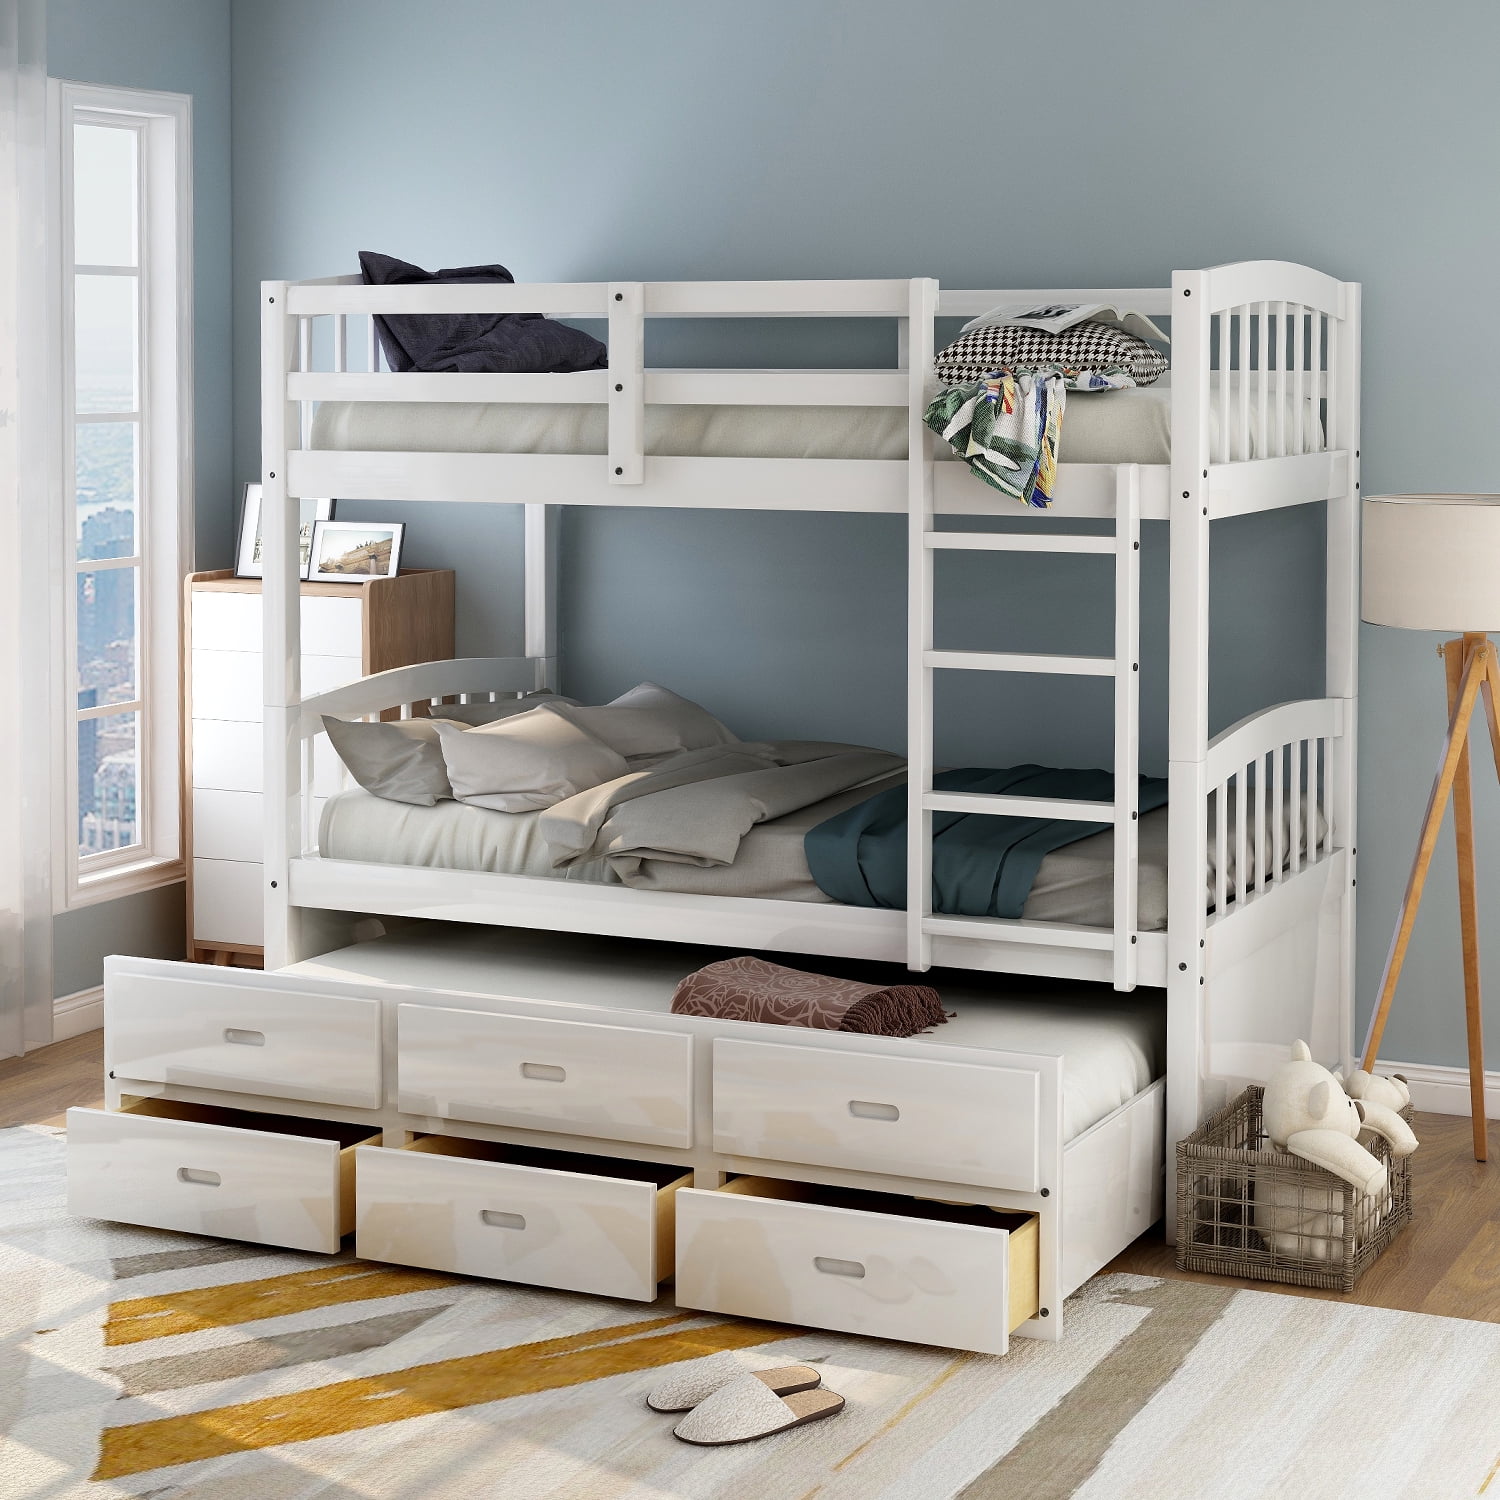 Euroco Twin Over Wood Bunk Bed, Twin Bunk Beds With Storage